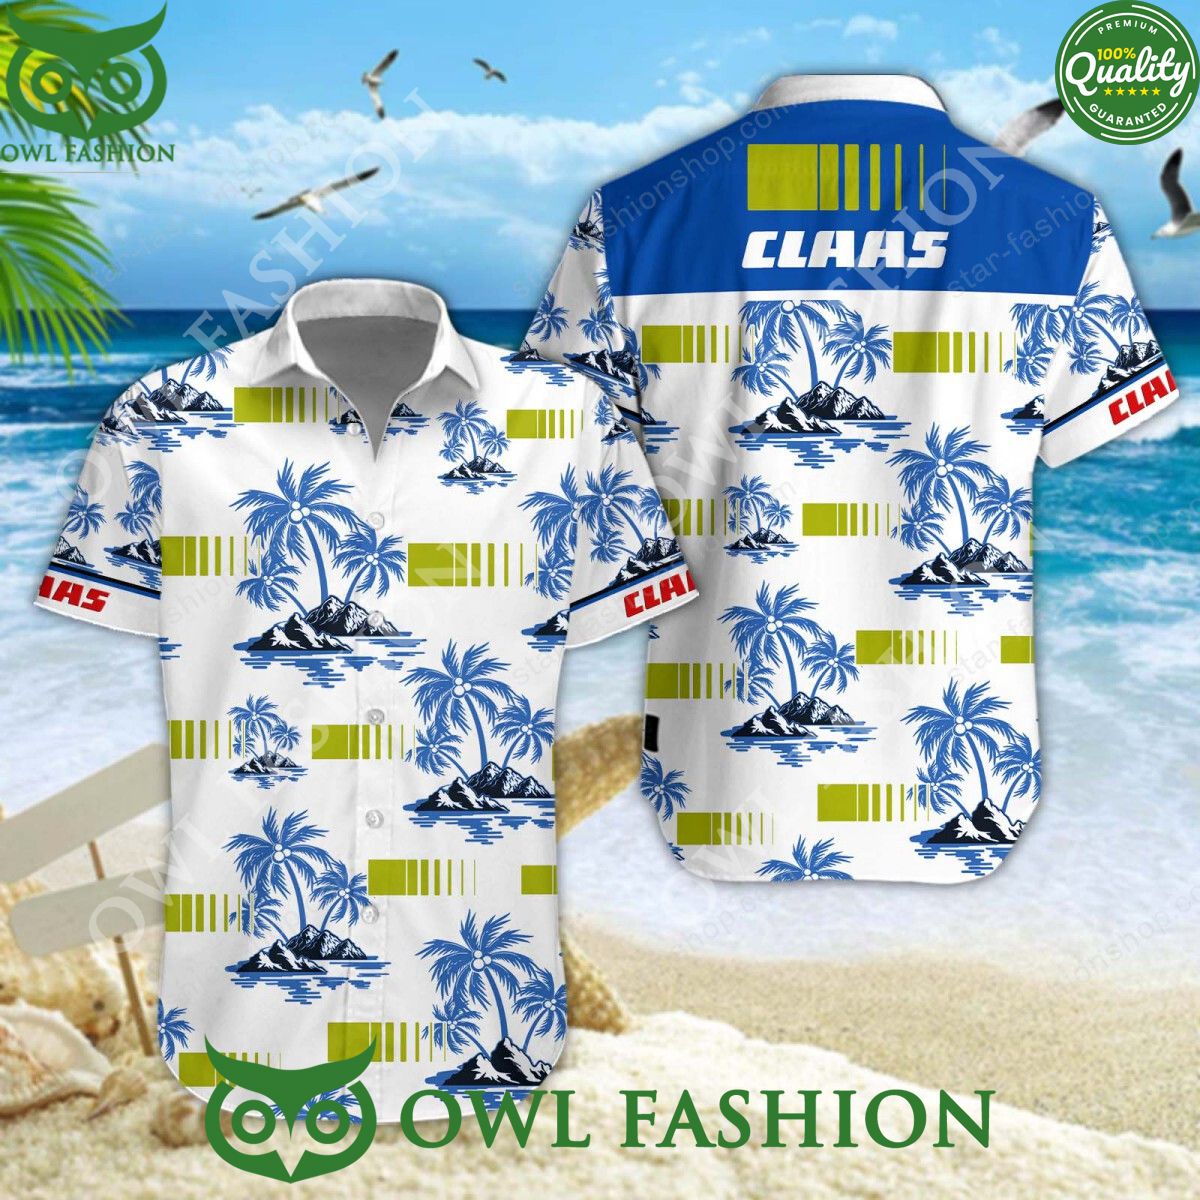 Claas Germany agricultural machinery manufacturer Hawaiian Shirt and Short